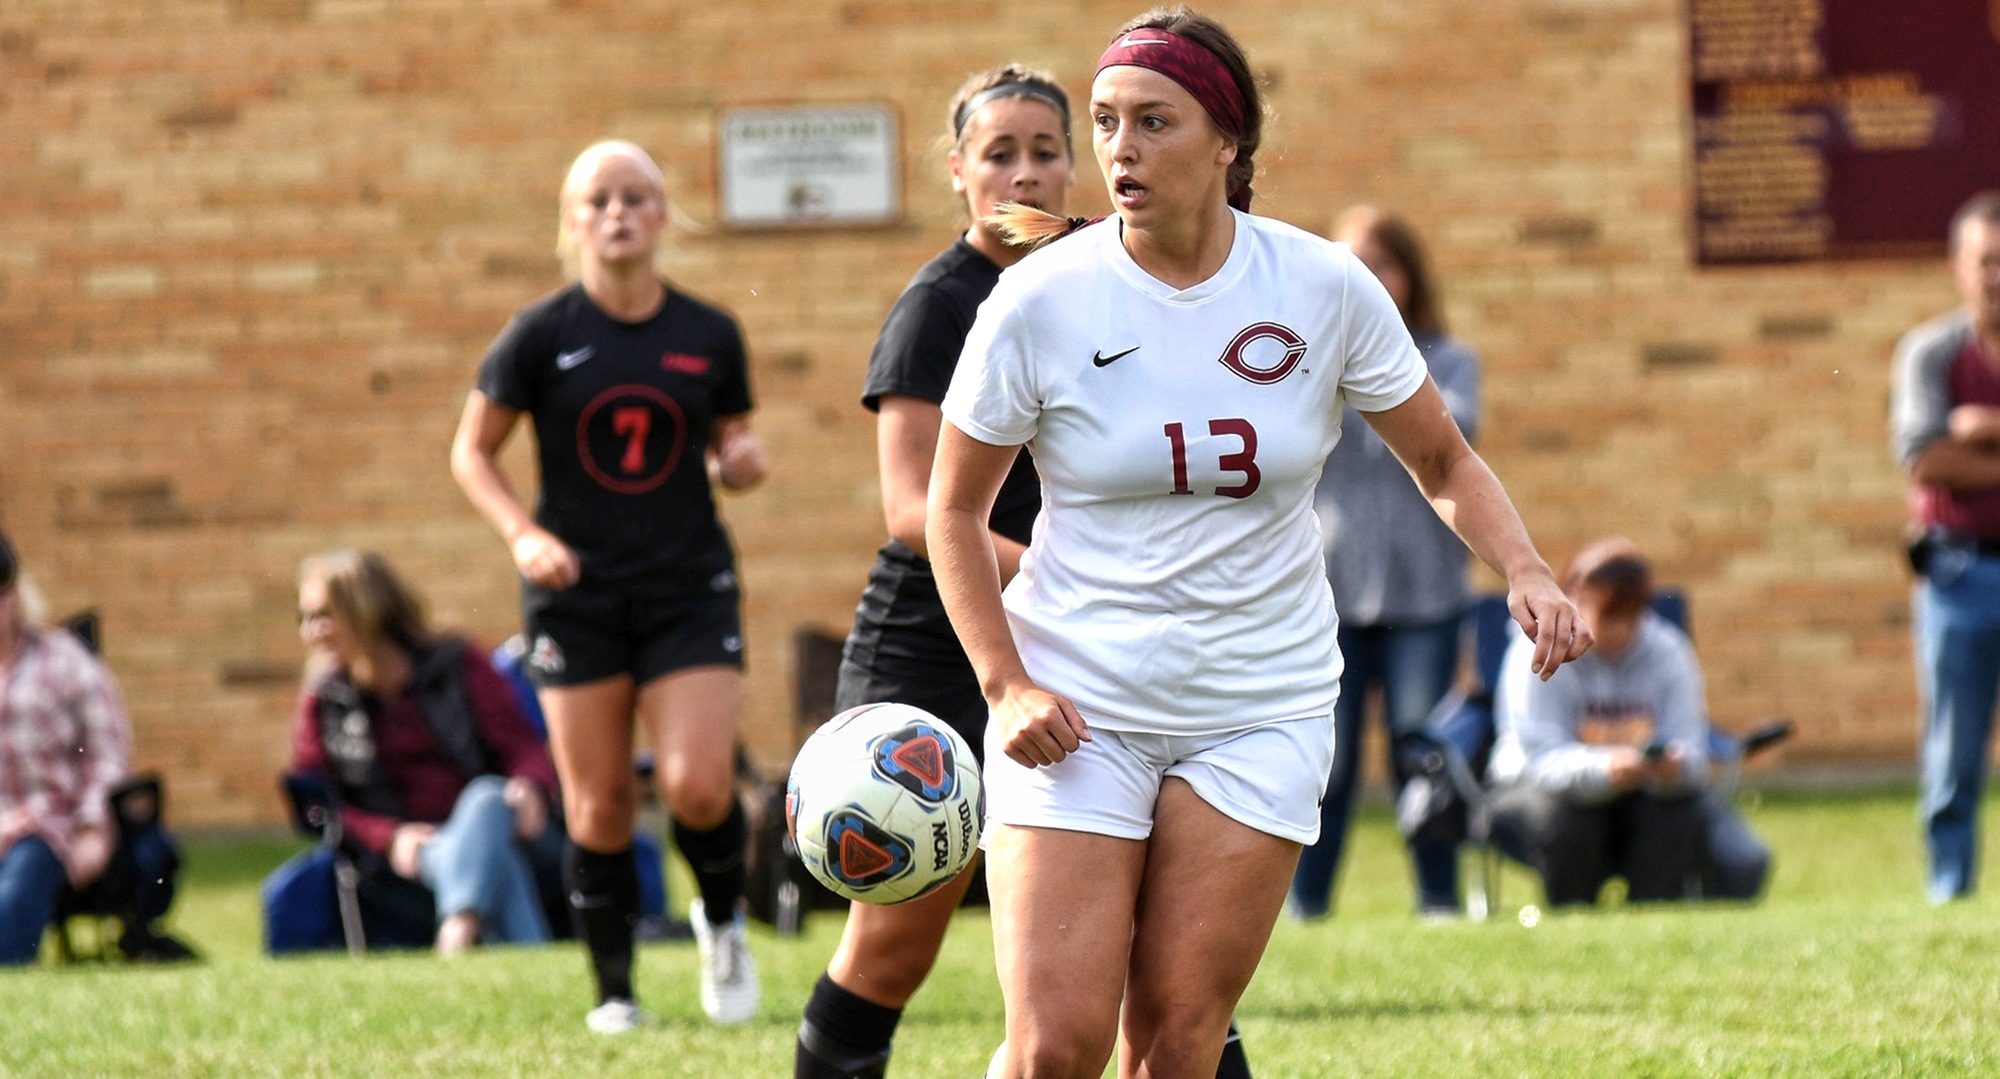 Kalli Baarstad scored her team-leading fifth goal of the year and helped the Cobbers gain a 1-1 2OT tie at Macalester.